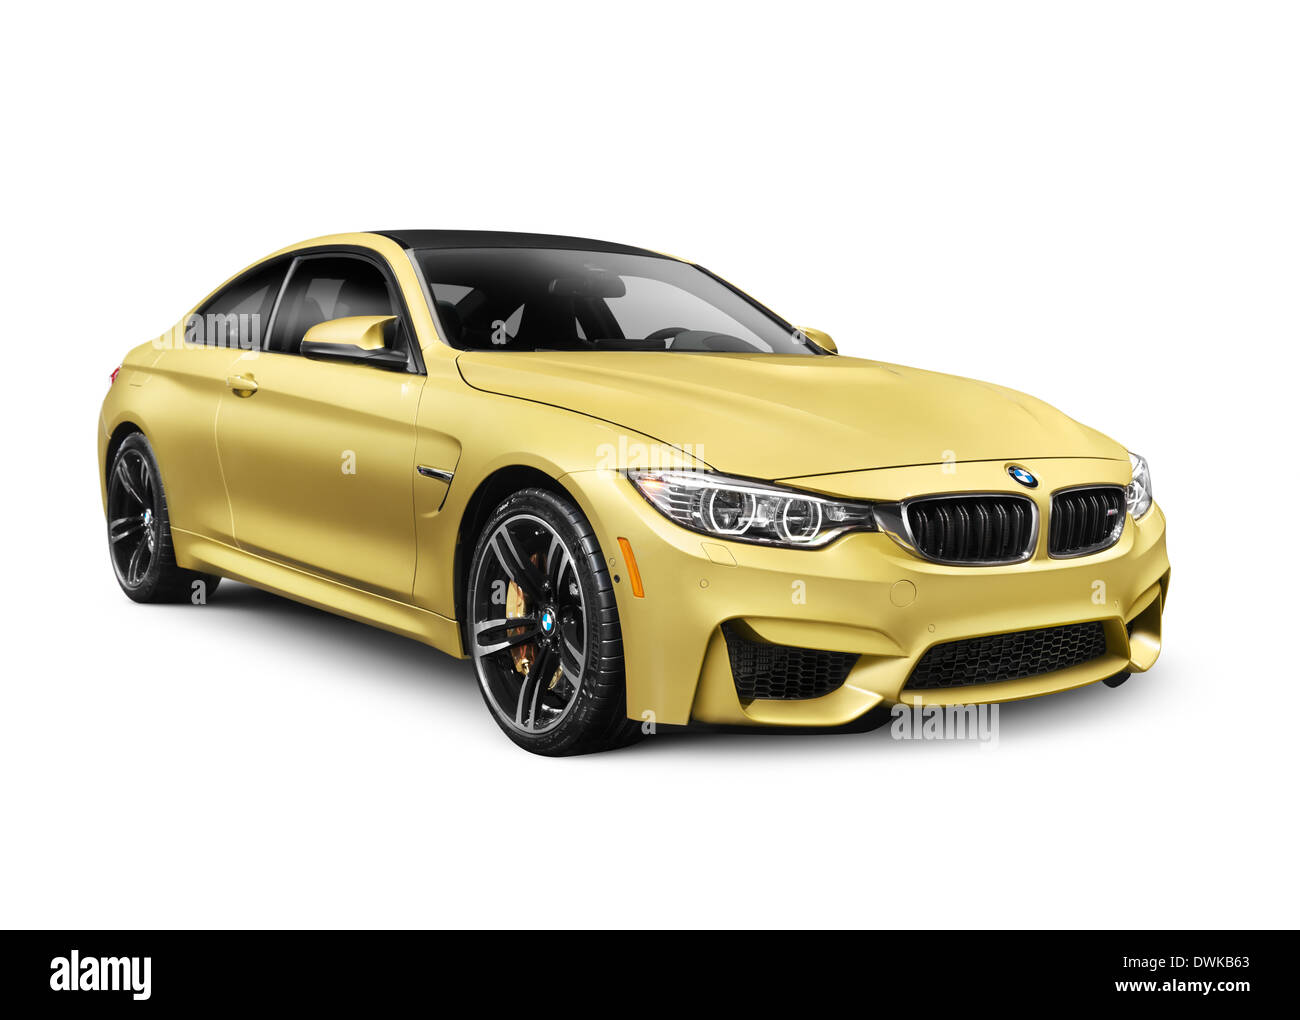 License and prints at MaximImages.com - BMW luxury car, automotive stock photo. Stock Photo